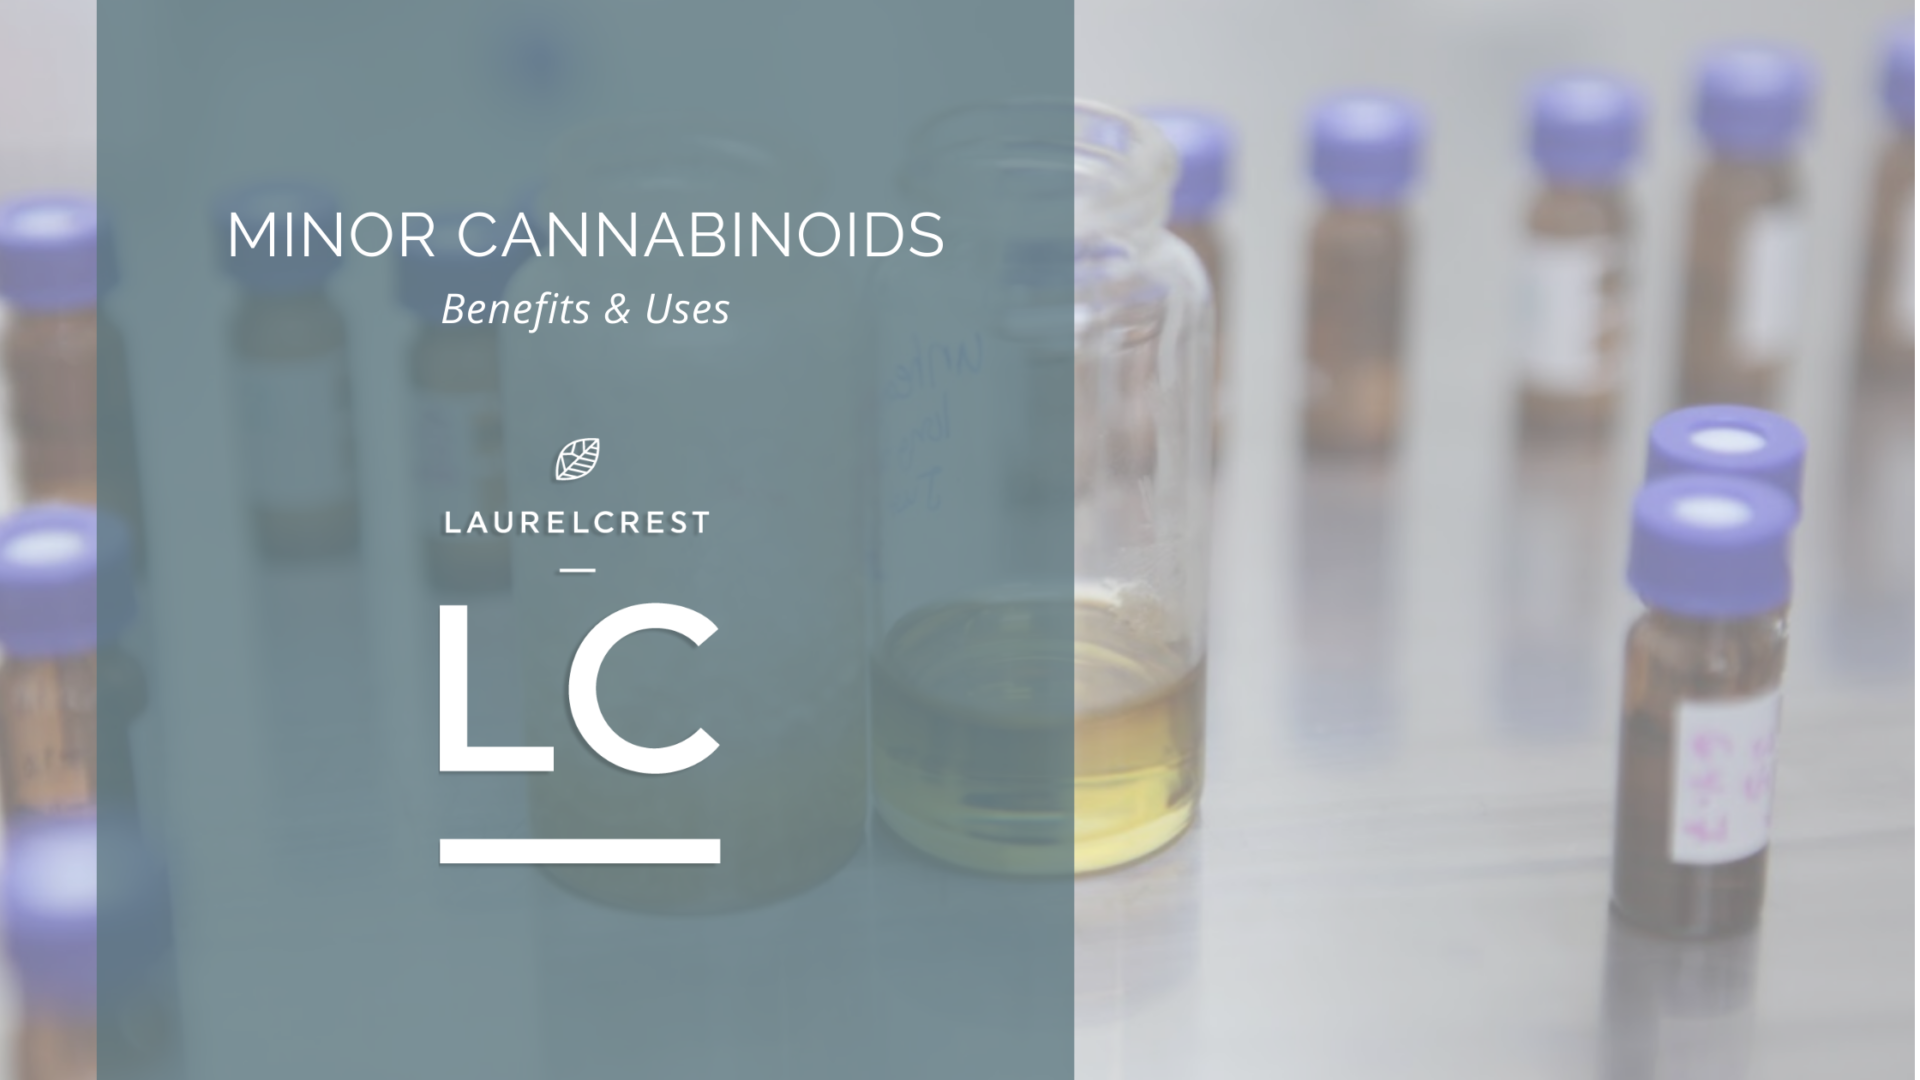 How Long Does It Take For Cbc Oil To Relieve Pain - Cbd|Oil|Cbc|Benefits|Effects|Pain|Thc|Products|Health|Study|Cannabinoids|Cannabis|Anxiety|Studies|Hemp|Research|Symptoms|People|Treatment|System|Plant|Body|Inflammation|Product|Evidence|Receptors|Cancer|Side|Effect|Properties|Brain|Dose|Disease|Marijuana|Cannabidiol|Disorders|Cannabinoid|Way|Relief|Cells|Cbd Oil|Cbc Oil|Cbd Products|Side Effects|Endocannabinoid System|Chronic Pain|Cannabis Plant|Pain Relief|Cbd Oil Benefits|Cannabis Oil|Health Benefits|Multiple Sclerosis|Hemp Plant|Anti-Inflammatory Properties|Blood Pressure|Entourage Effect|Neuropathic Pain|Cbd Product|Hemp Oil|Full-Spectrum Cbd Oil|Nervous System|Hemp Seed Oil|High Blood Pressure|Immune System|Cbd Gummies|Cannabis Oil Benefits|Drug Administration|Anxiety Disorders|Dravet Syndrome|Lennox-Gastaut Syndrome